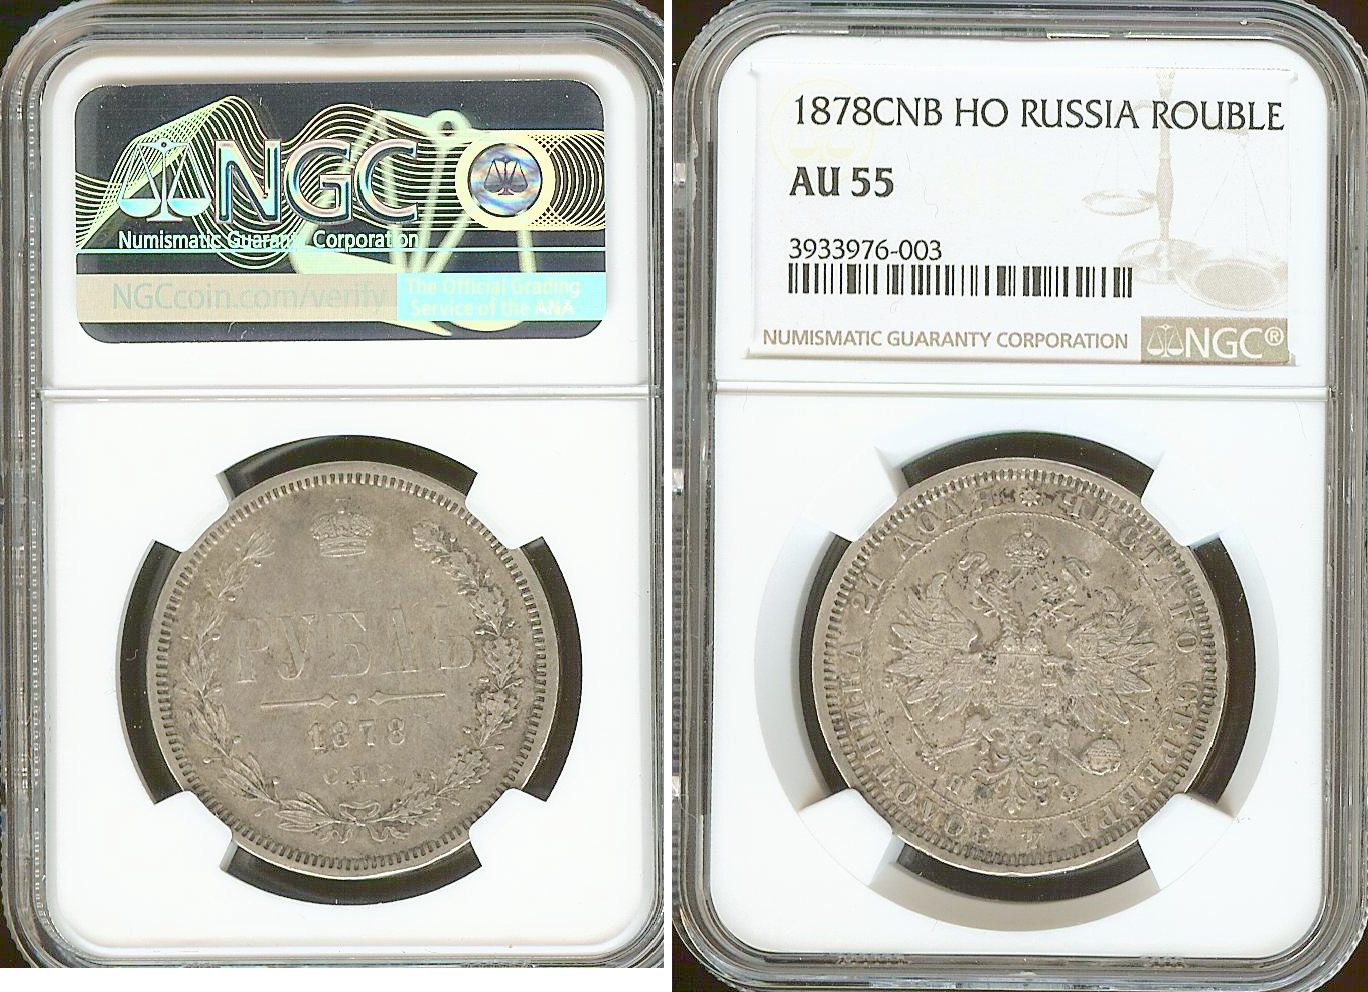 Russian rouble 1878 NGC AU55